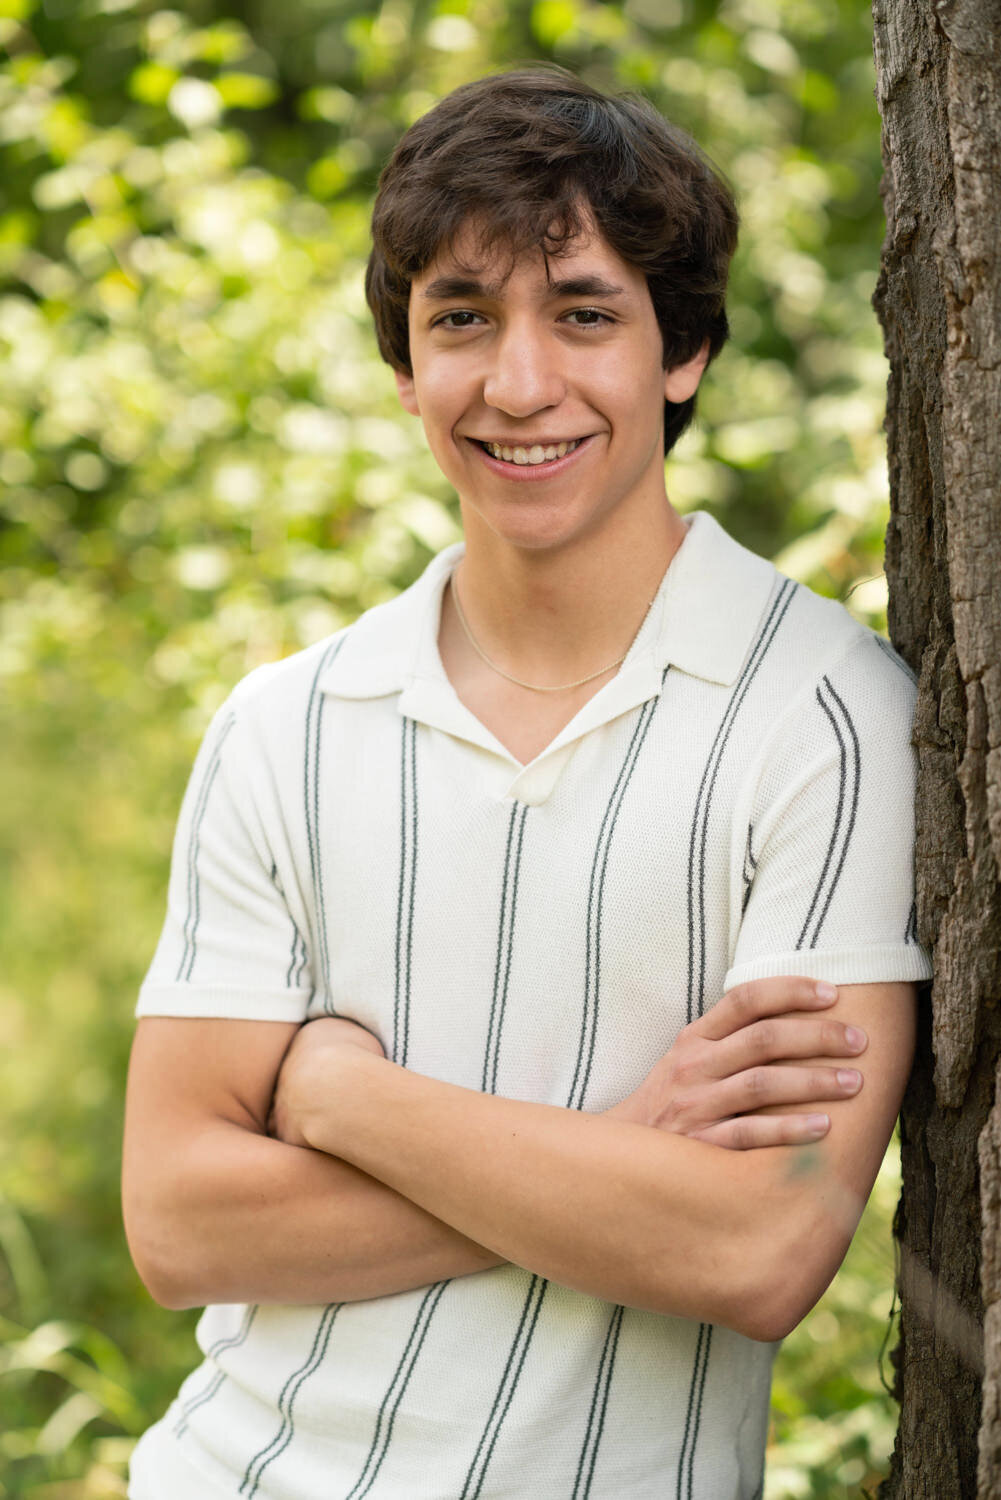 Senior boy in collared shirt smiles while standing against a tree.